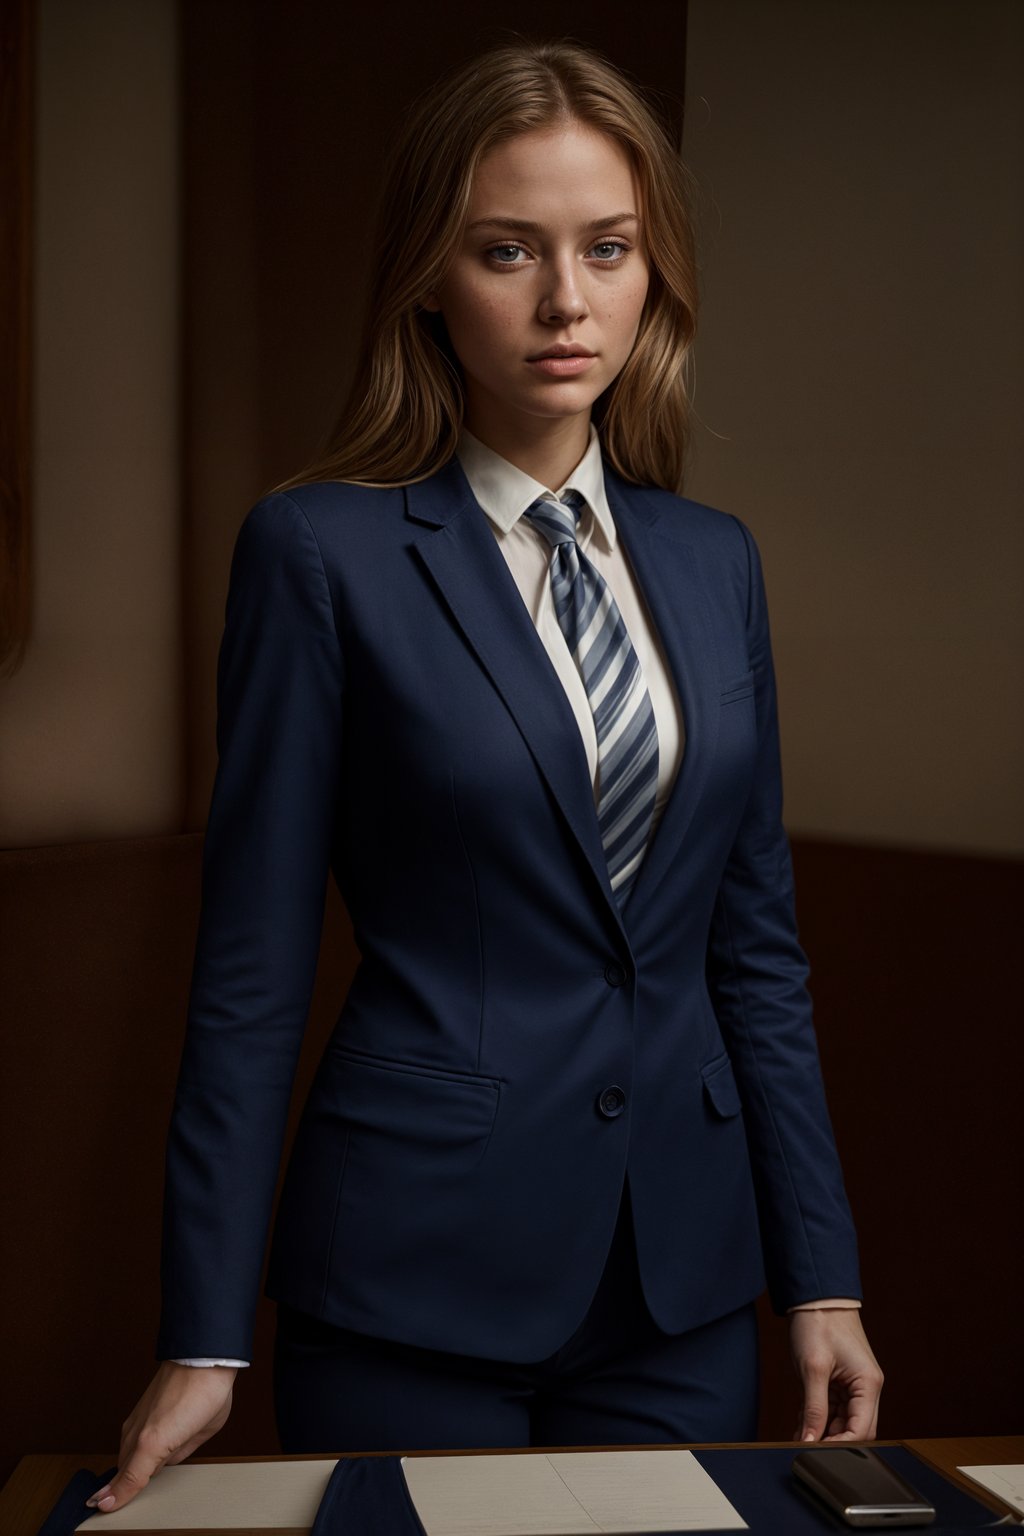 woman wearing a classic navy blue suit with a crisp white dress shirt and a patterned tie